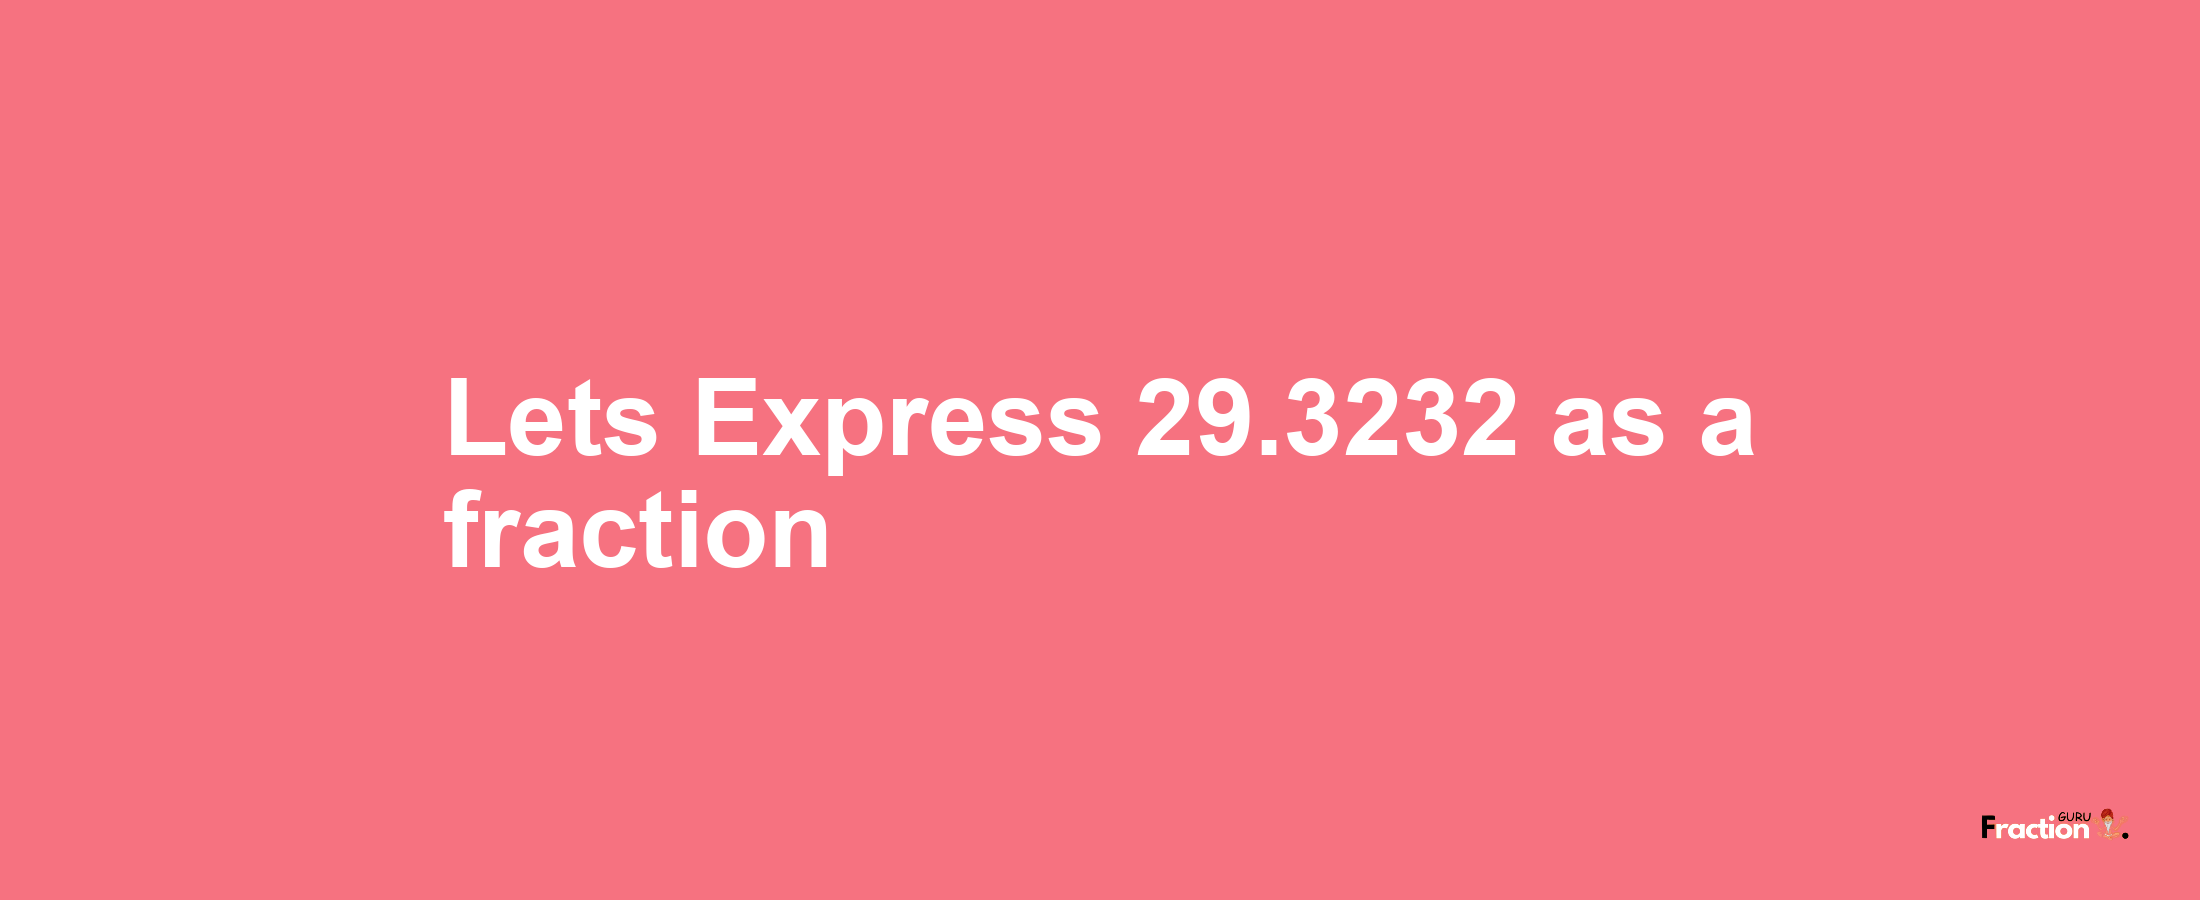 Lets Express 29.3232 as afraction